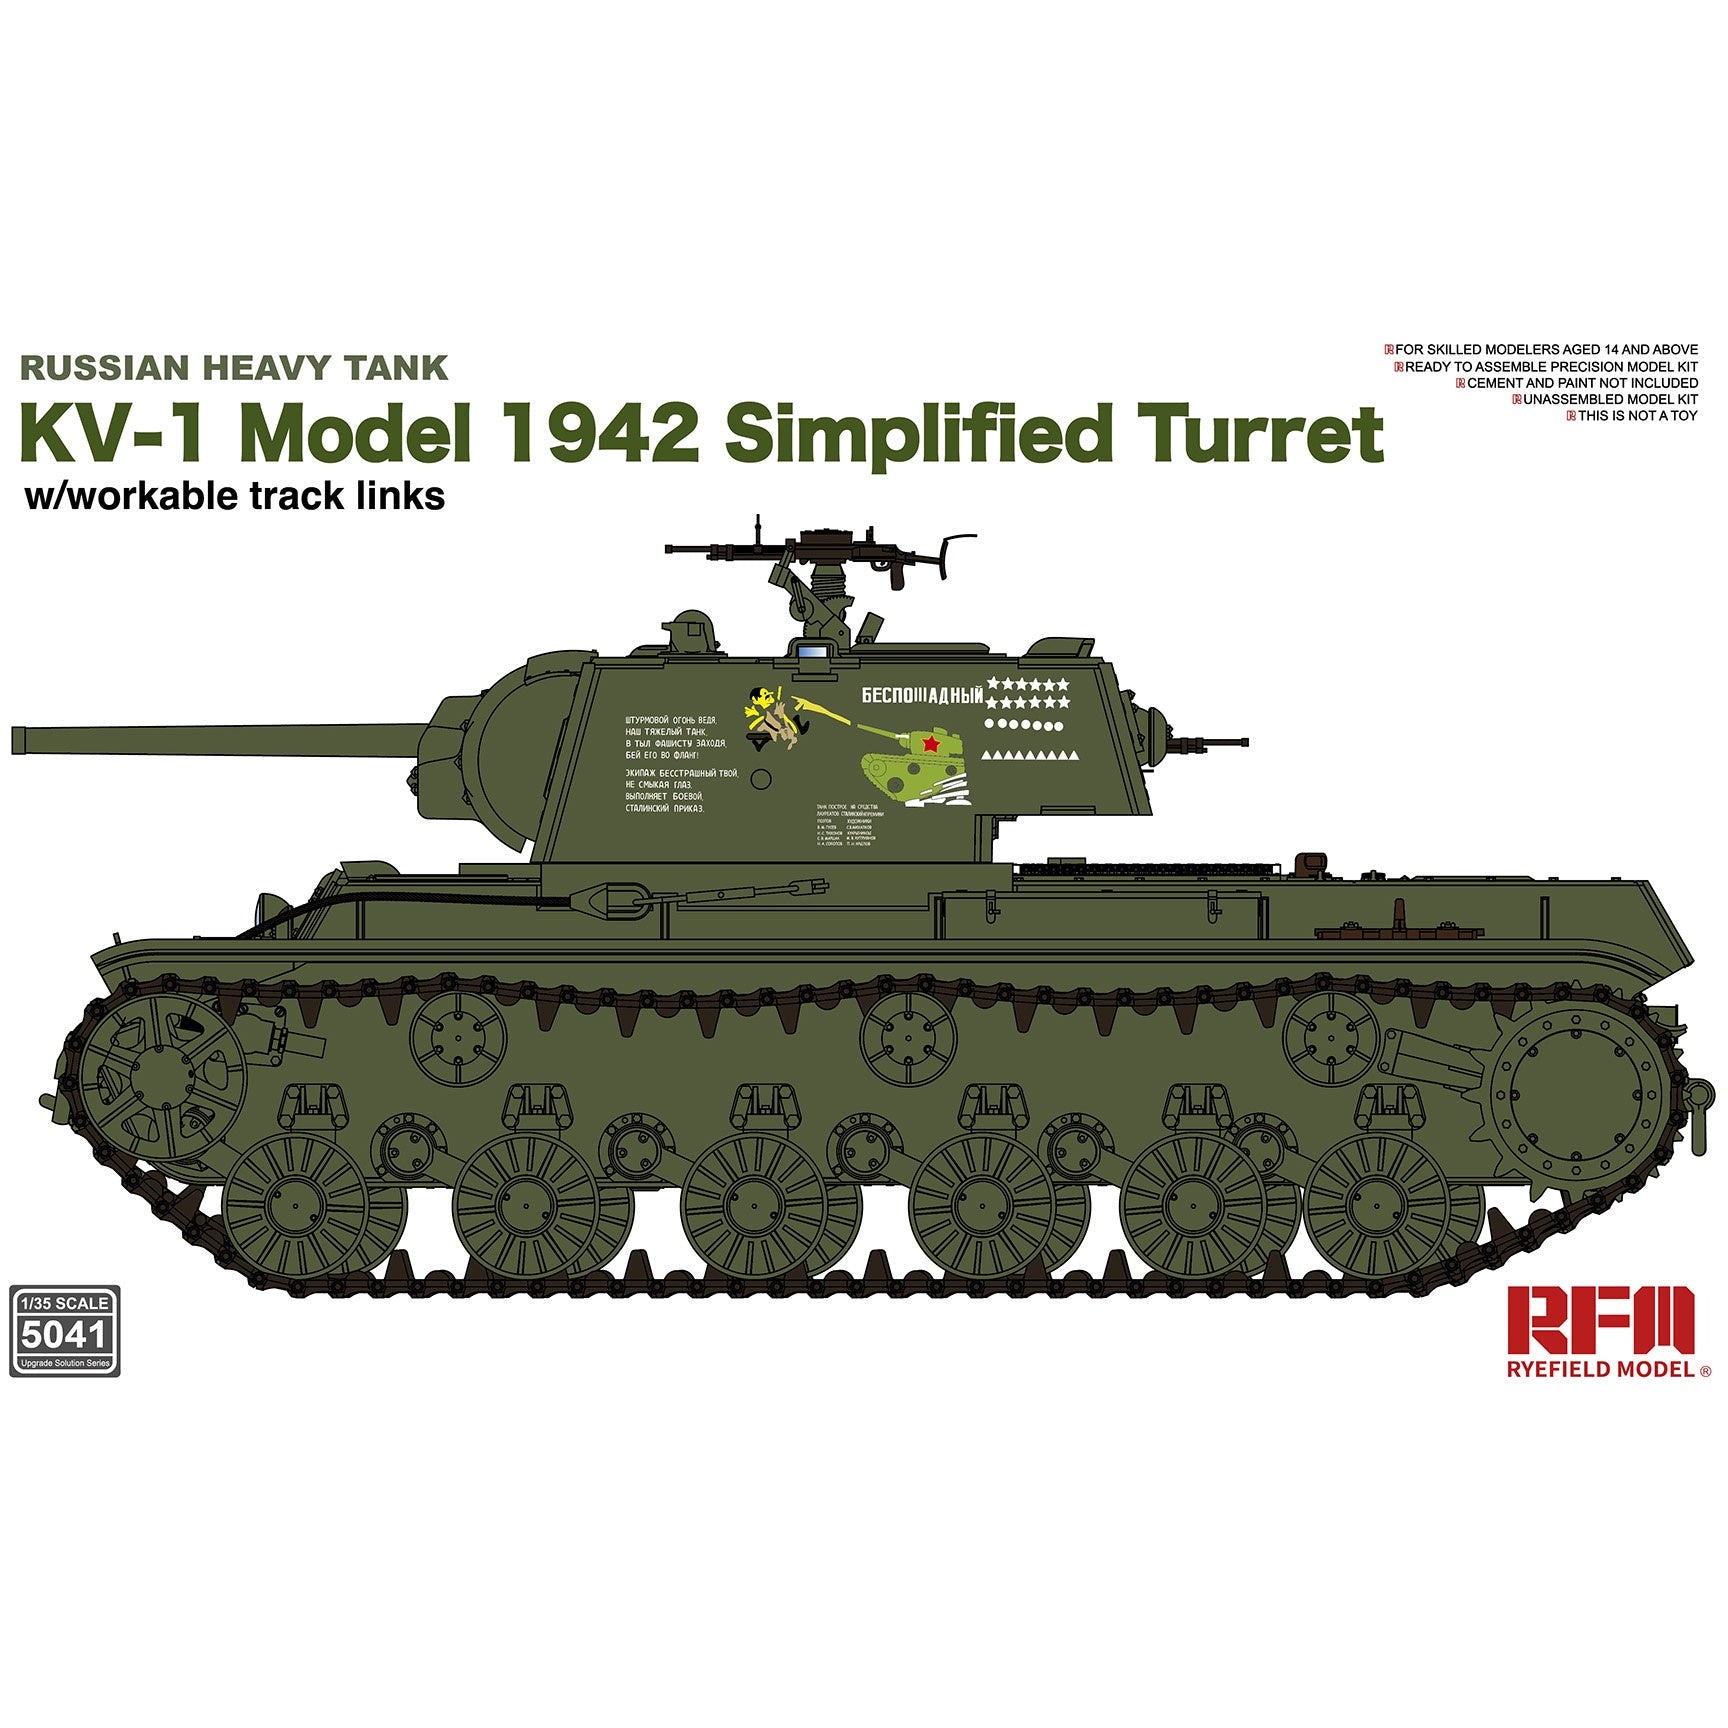 1942 Simplified Turret KV-1 1/35 #RM-5041 by Ryefield Model